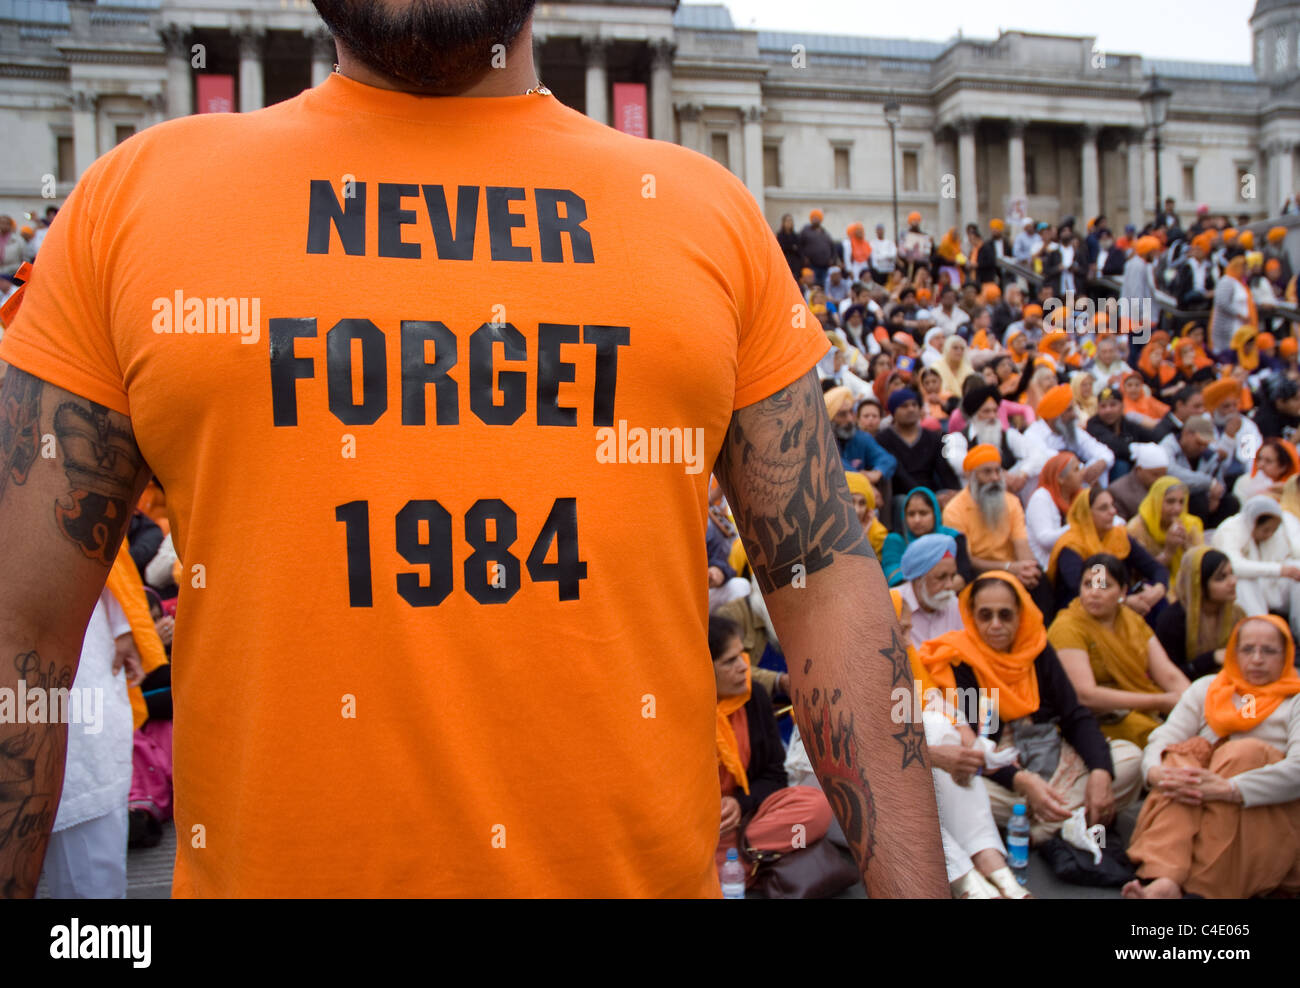 a Sikh man wears a orange never forget 1984 t shirt Stock Photo